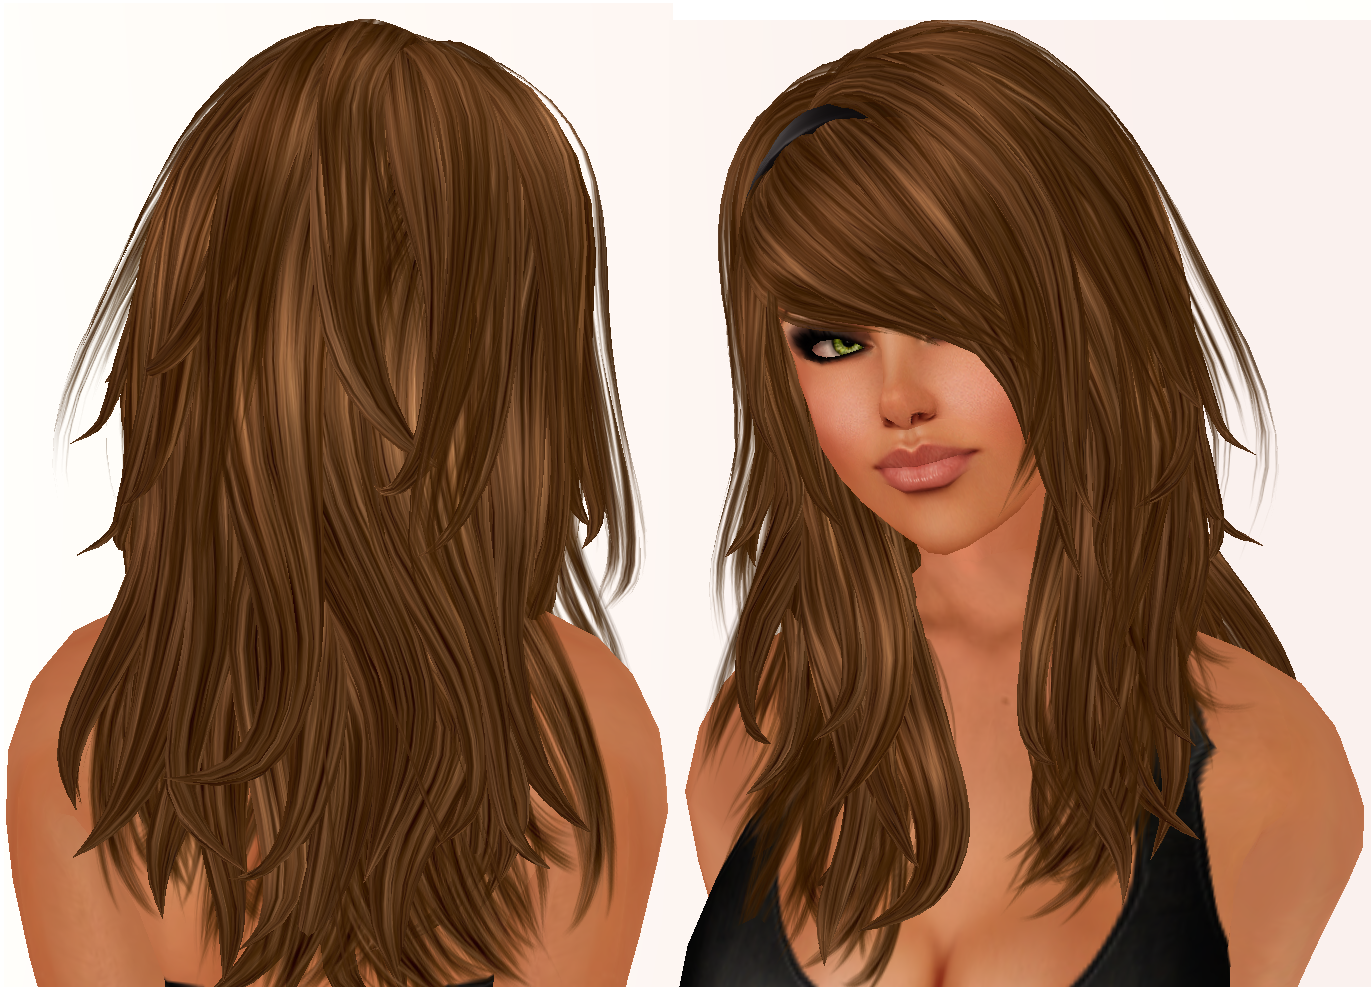 Long Layered Hair With Bangs | Long hair with lots of layers and side bangs pictures 3